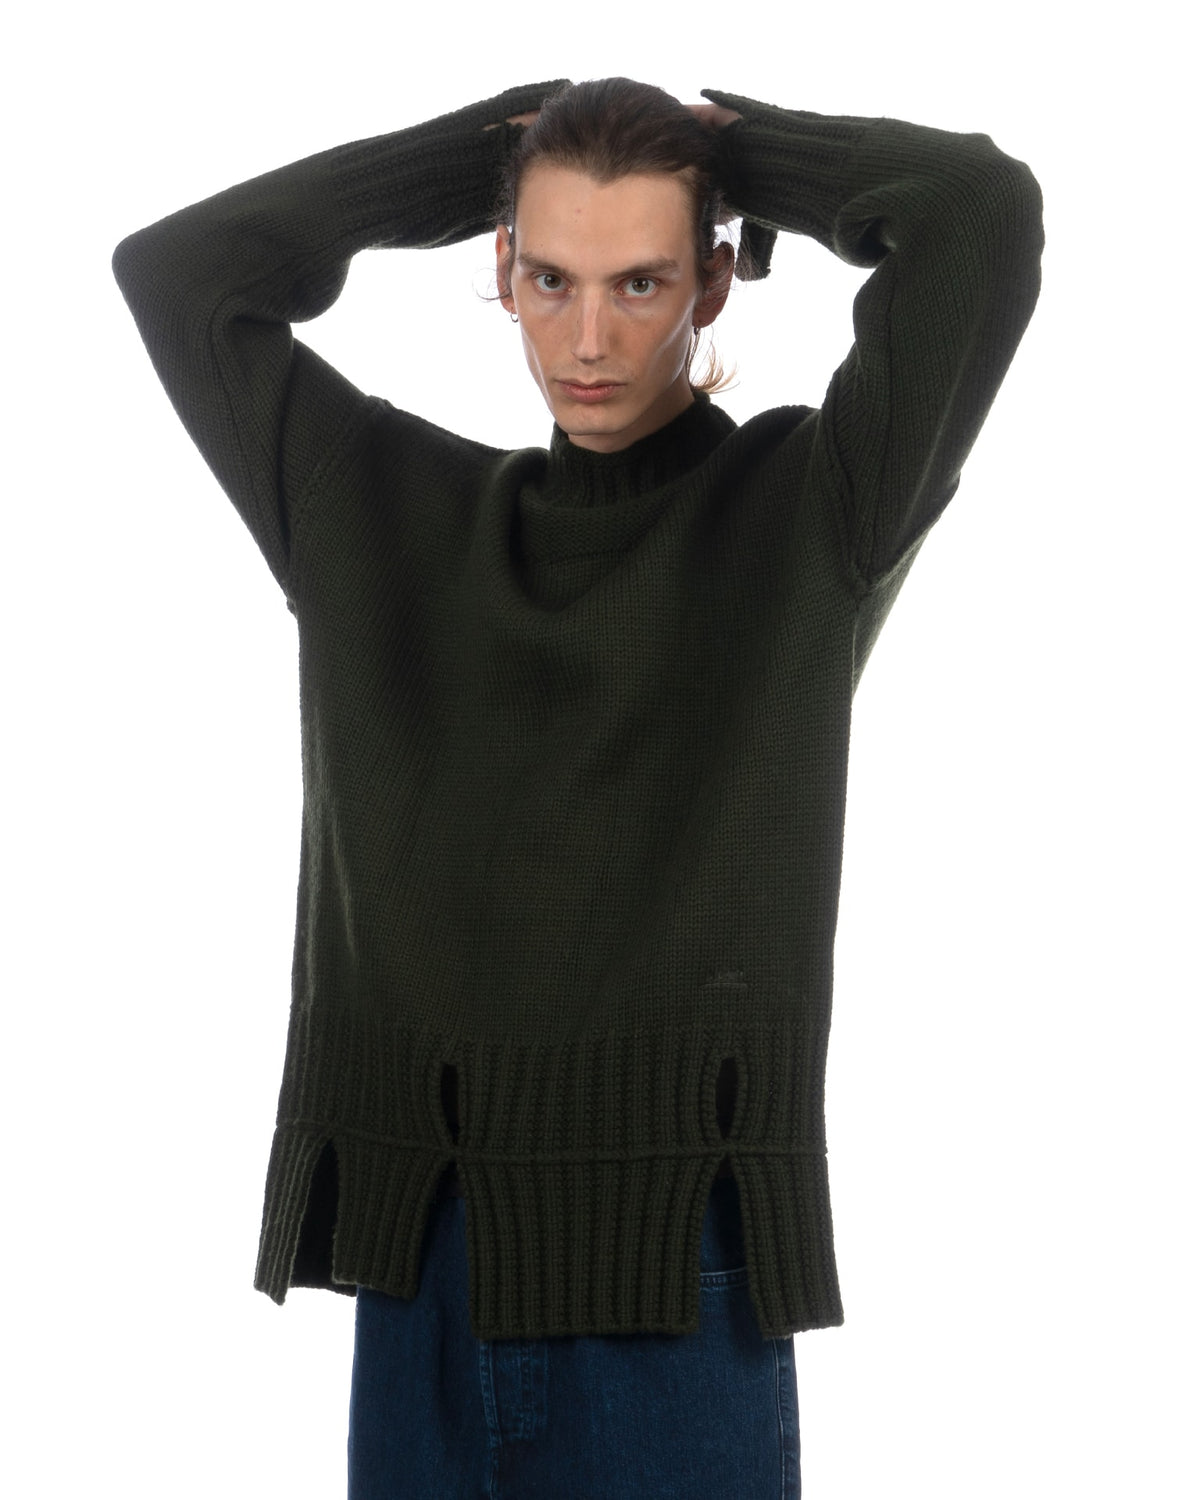 A-COLD-WALL* | Textured Mock Neck Knit Dark Pine Green - Concrete